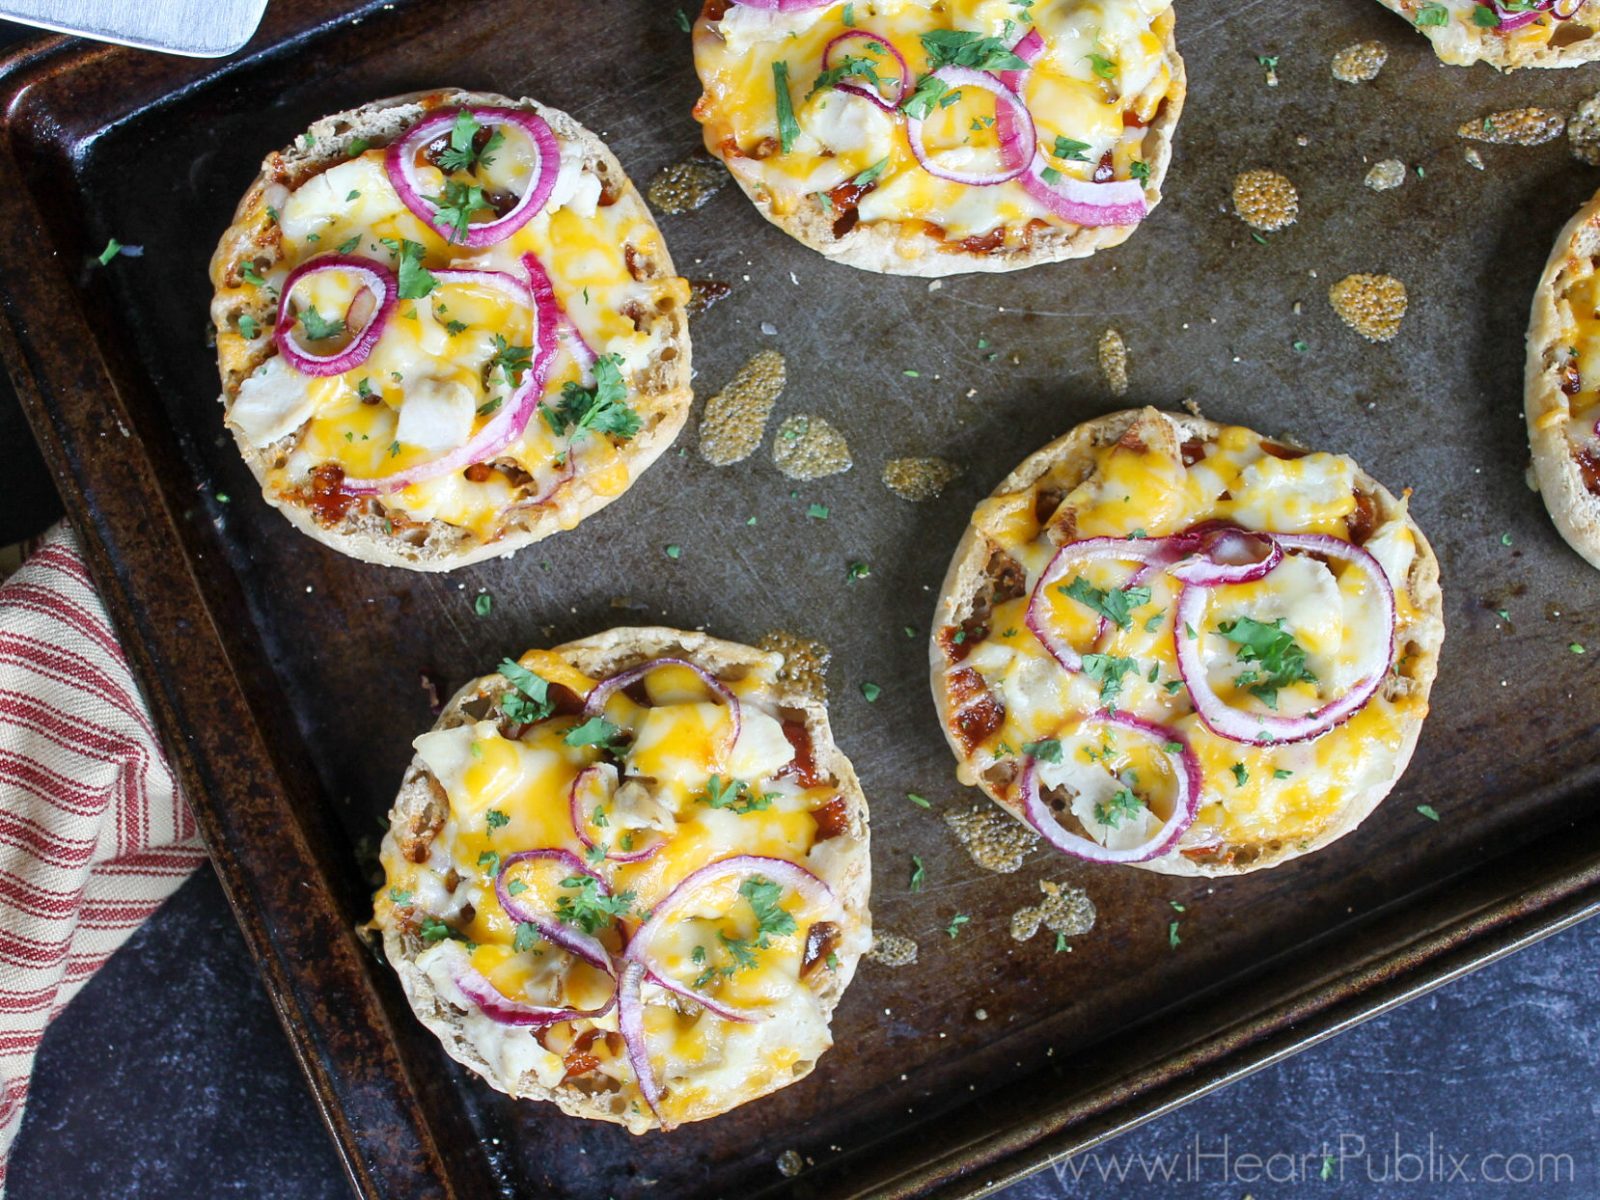 BBQ Chicken English Muffin Pizzas – Super Meal To Go With The Sales At Publix!